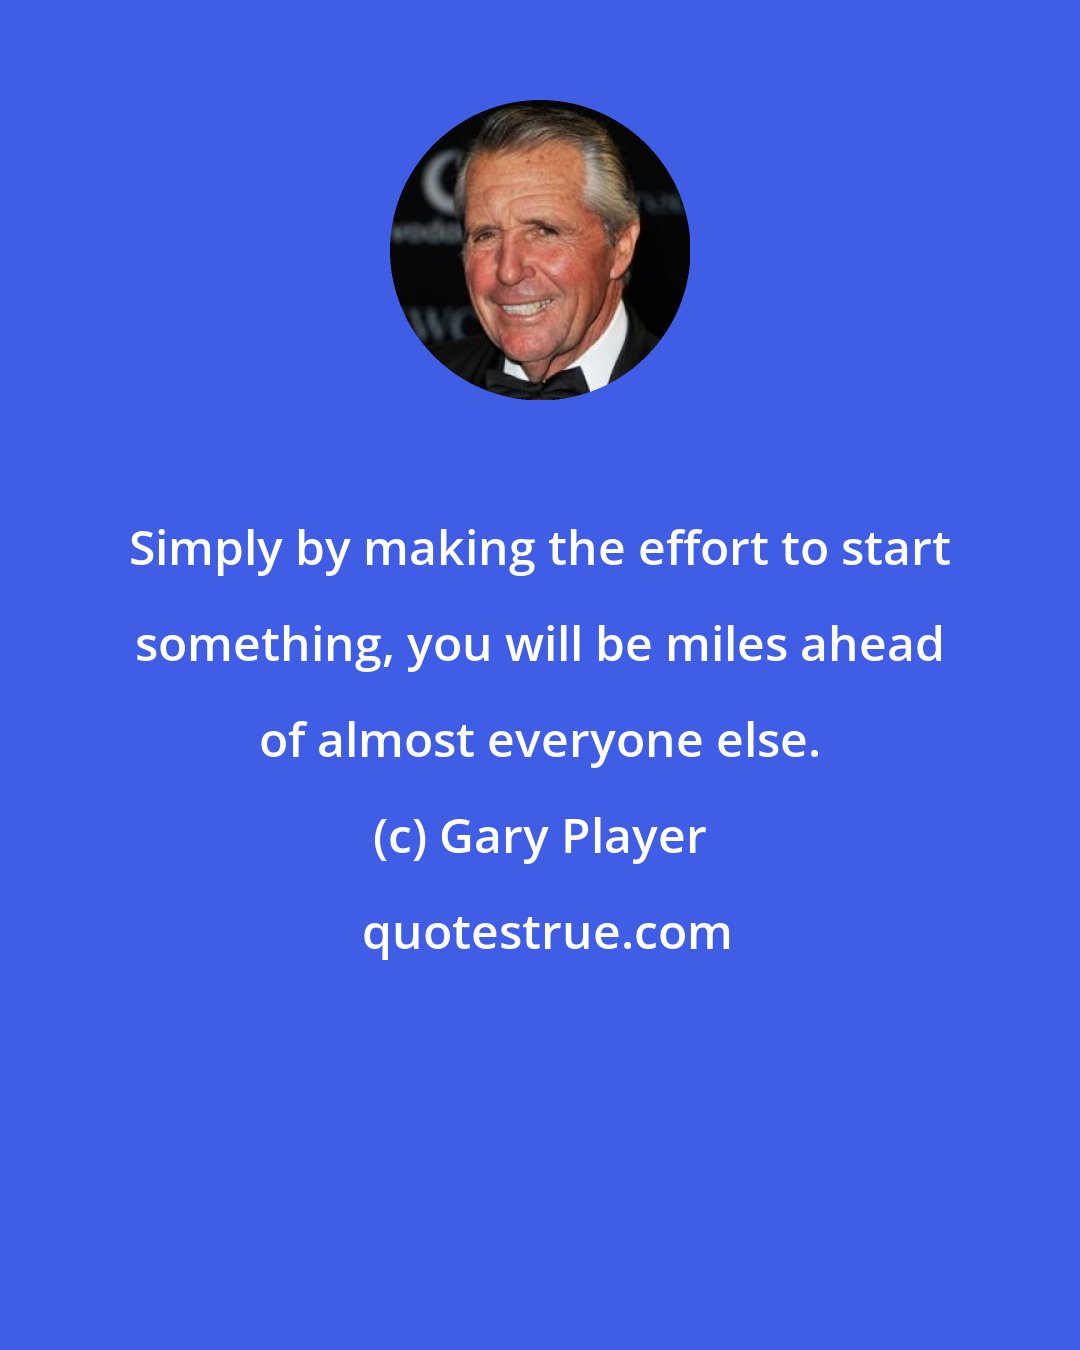 Gary Player: Simply by making the effort to start something, you will be miles ahead of almost everyone else.